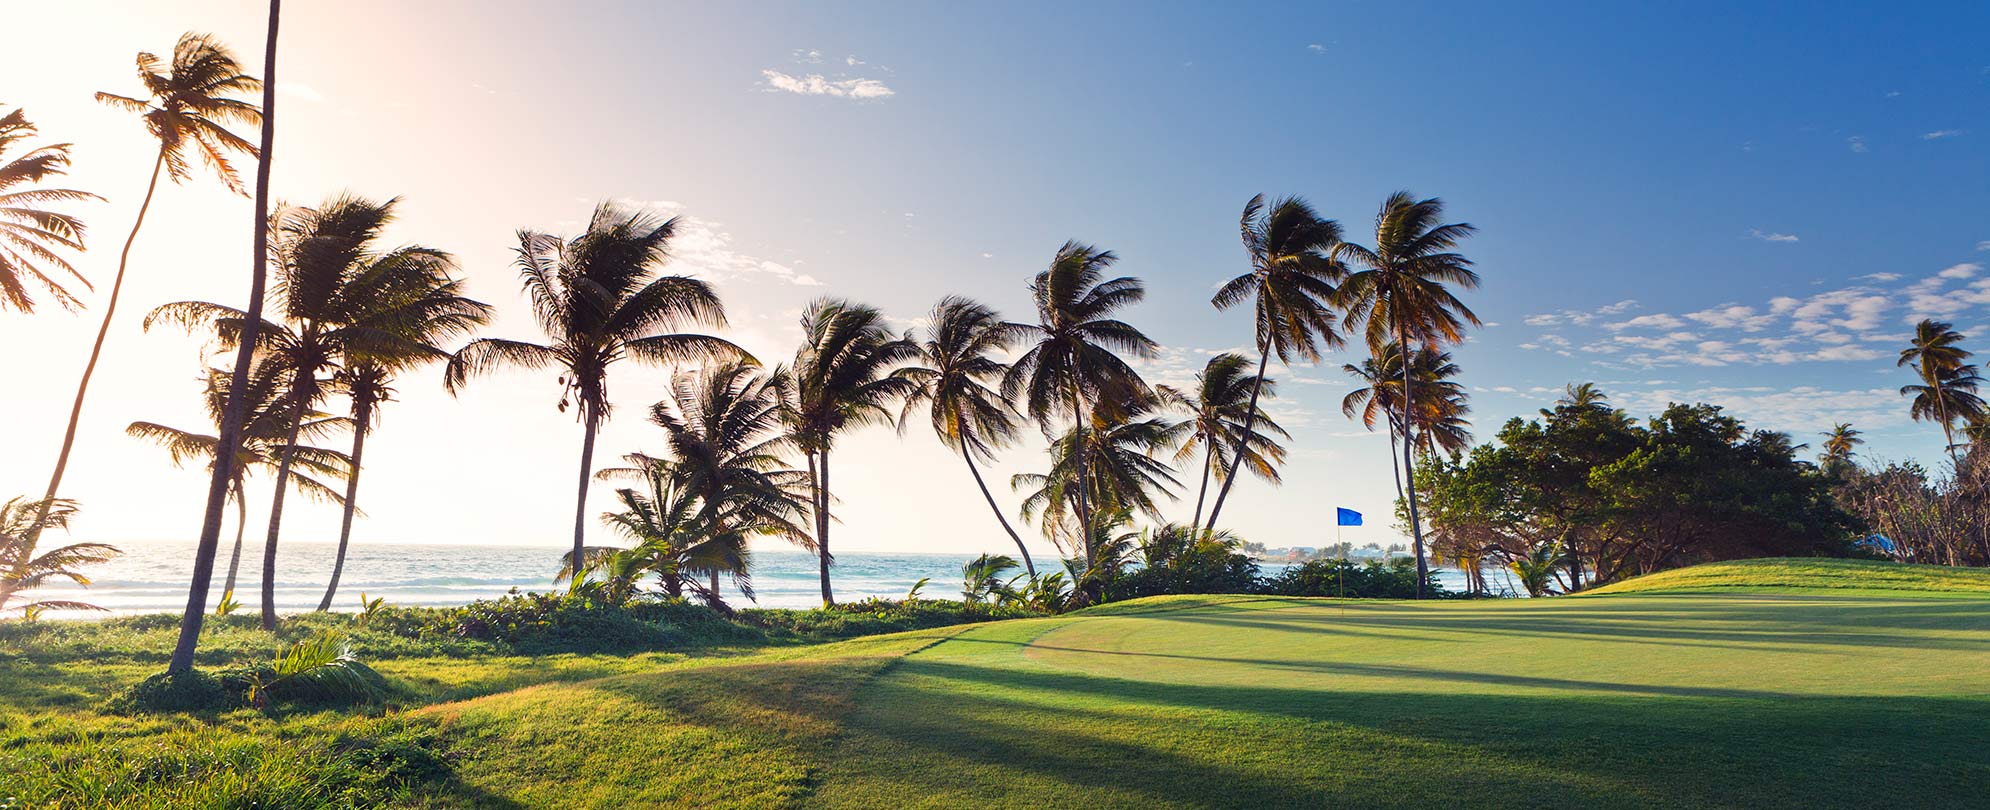 A beautifully landscaped golf course in a tropical destination.